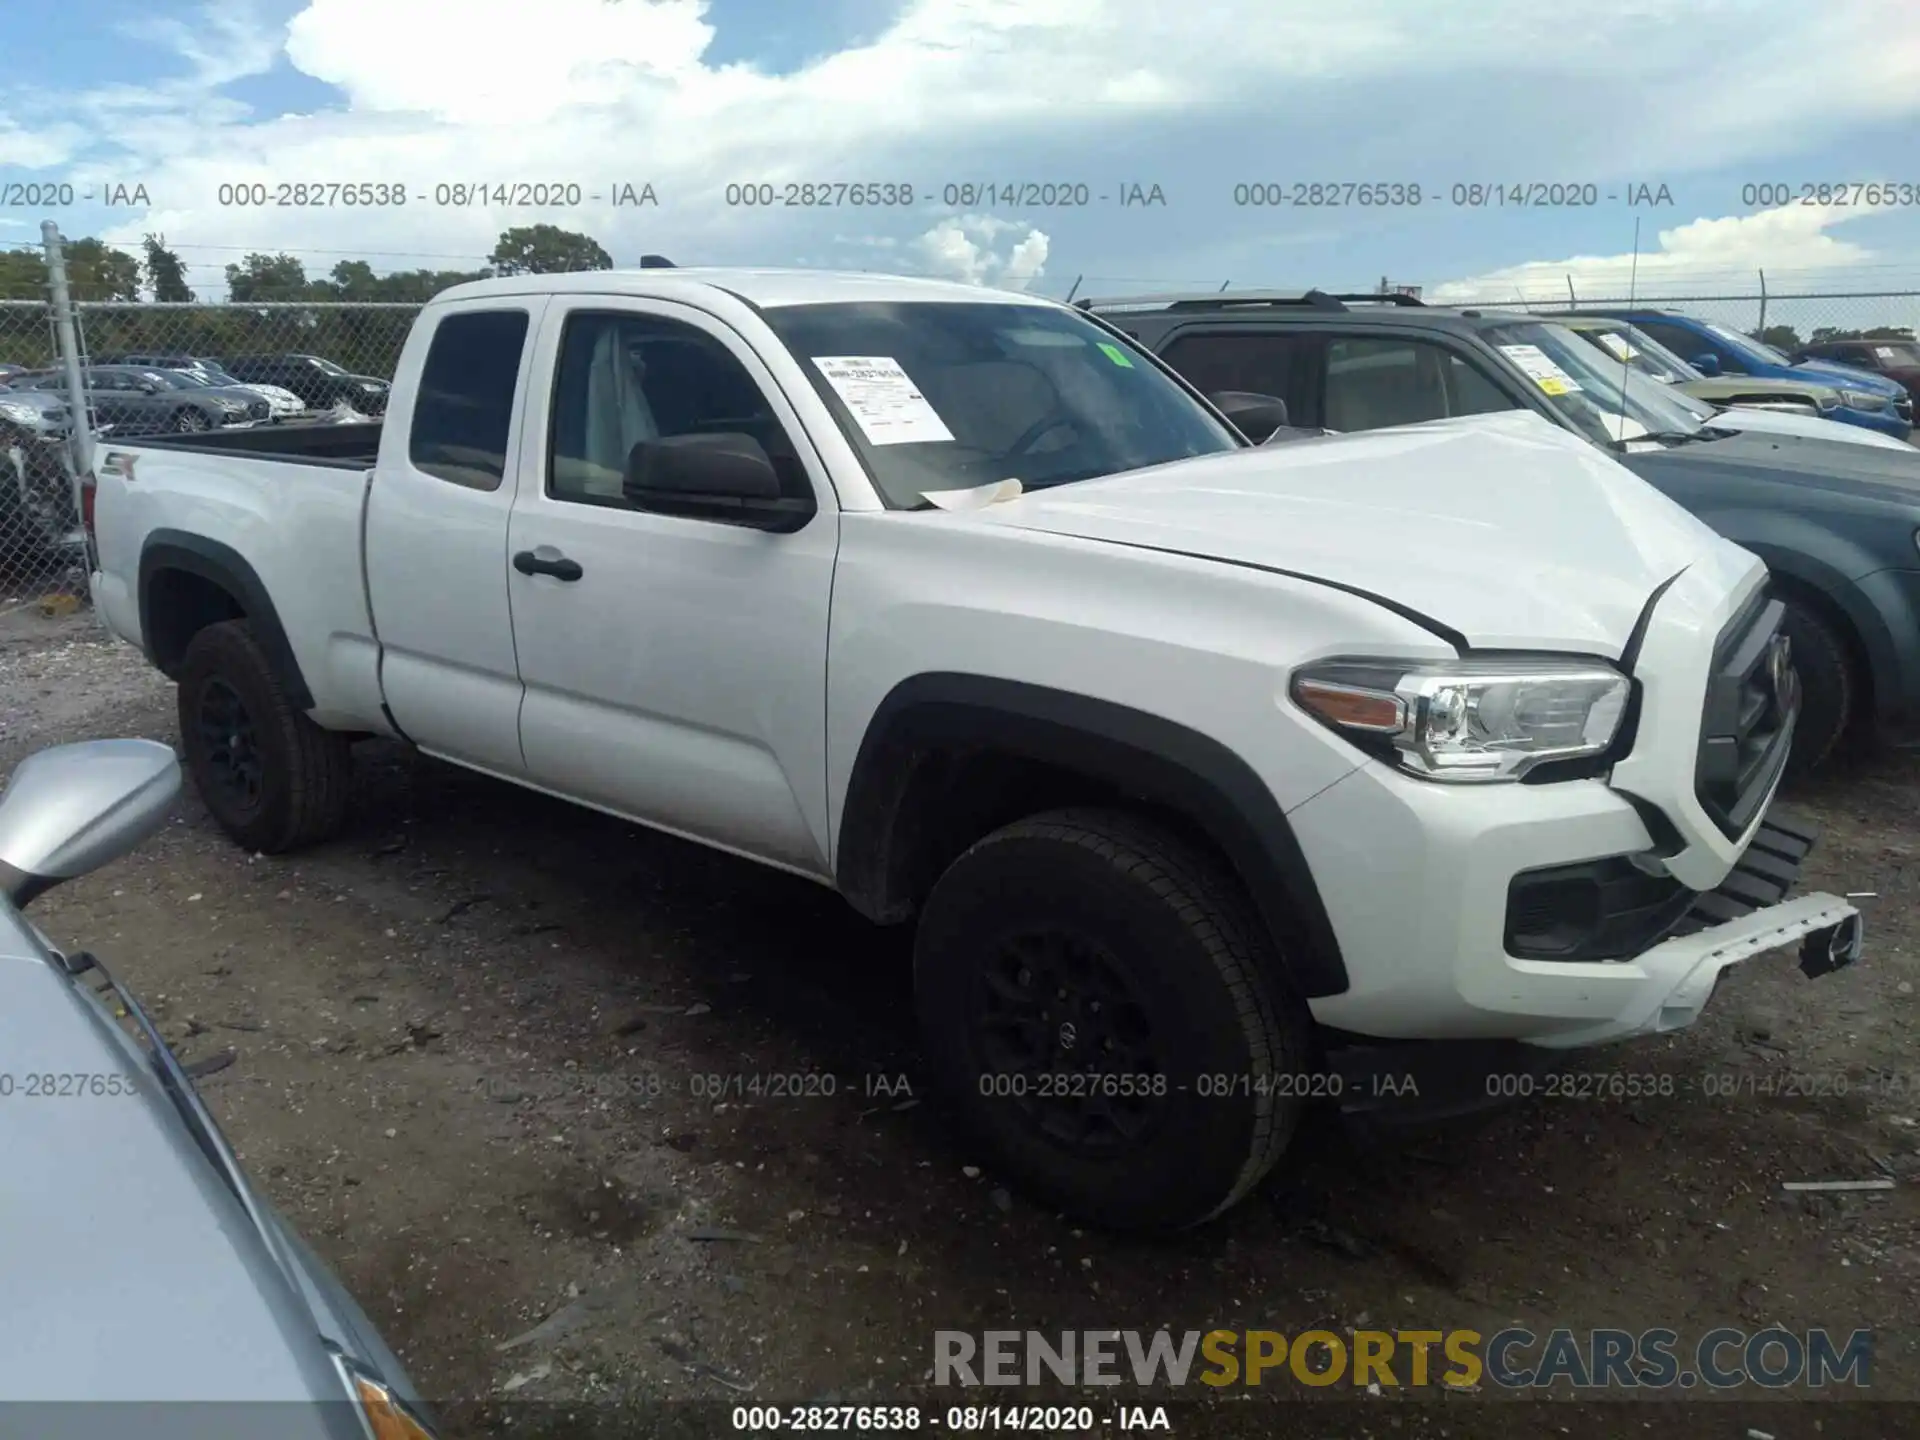 1 Photograph of a damaged car 5TFRX5GN6LX166519 TOYOTA TACOMA 2WD 2020